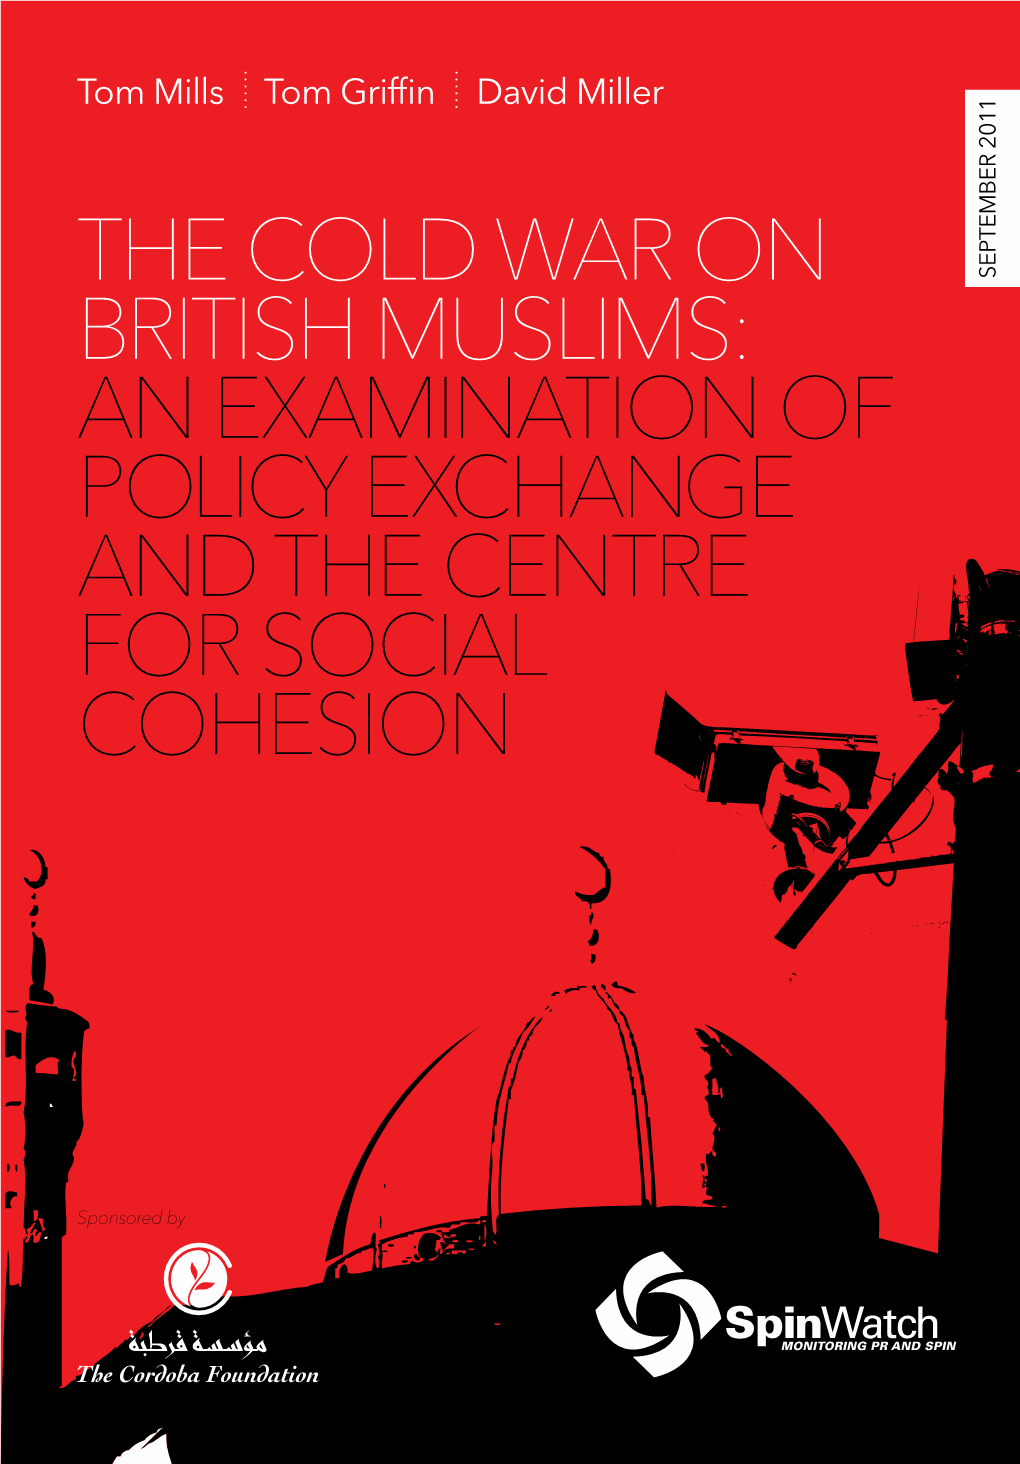 The Cold War on British Muslims: an Examination of Policy Exchange and the Centre for Social Cohesion September 2011